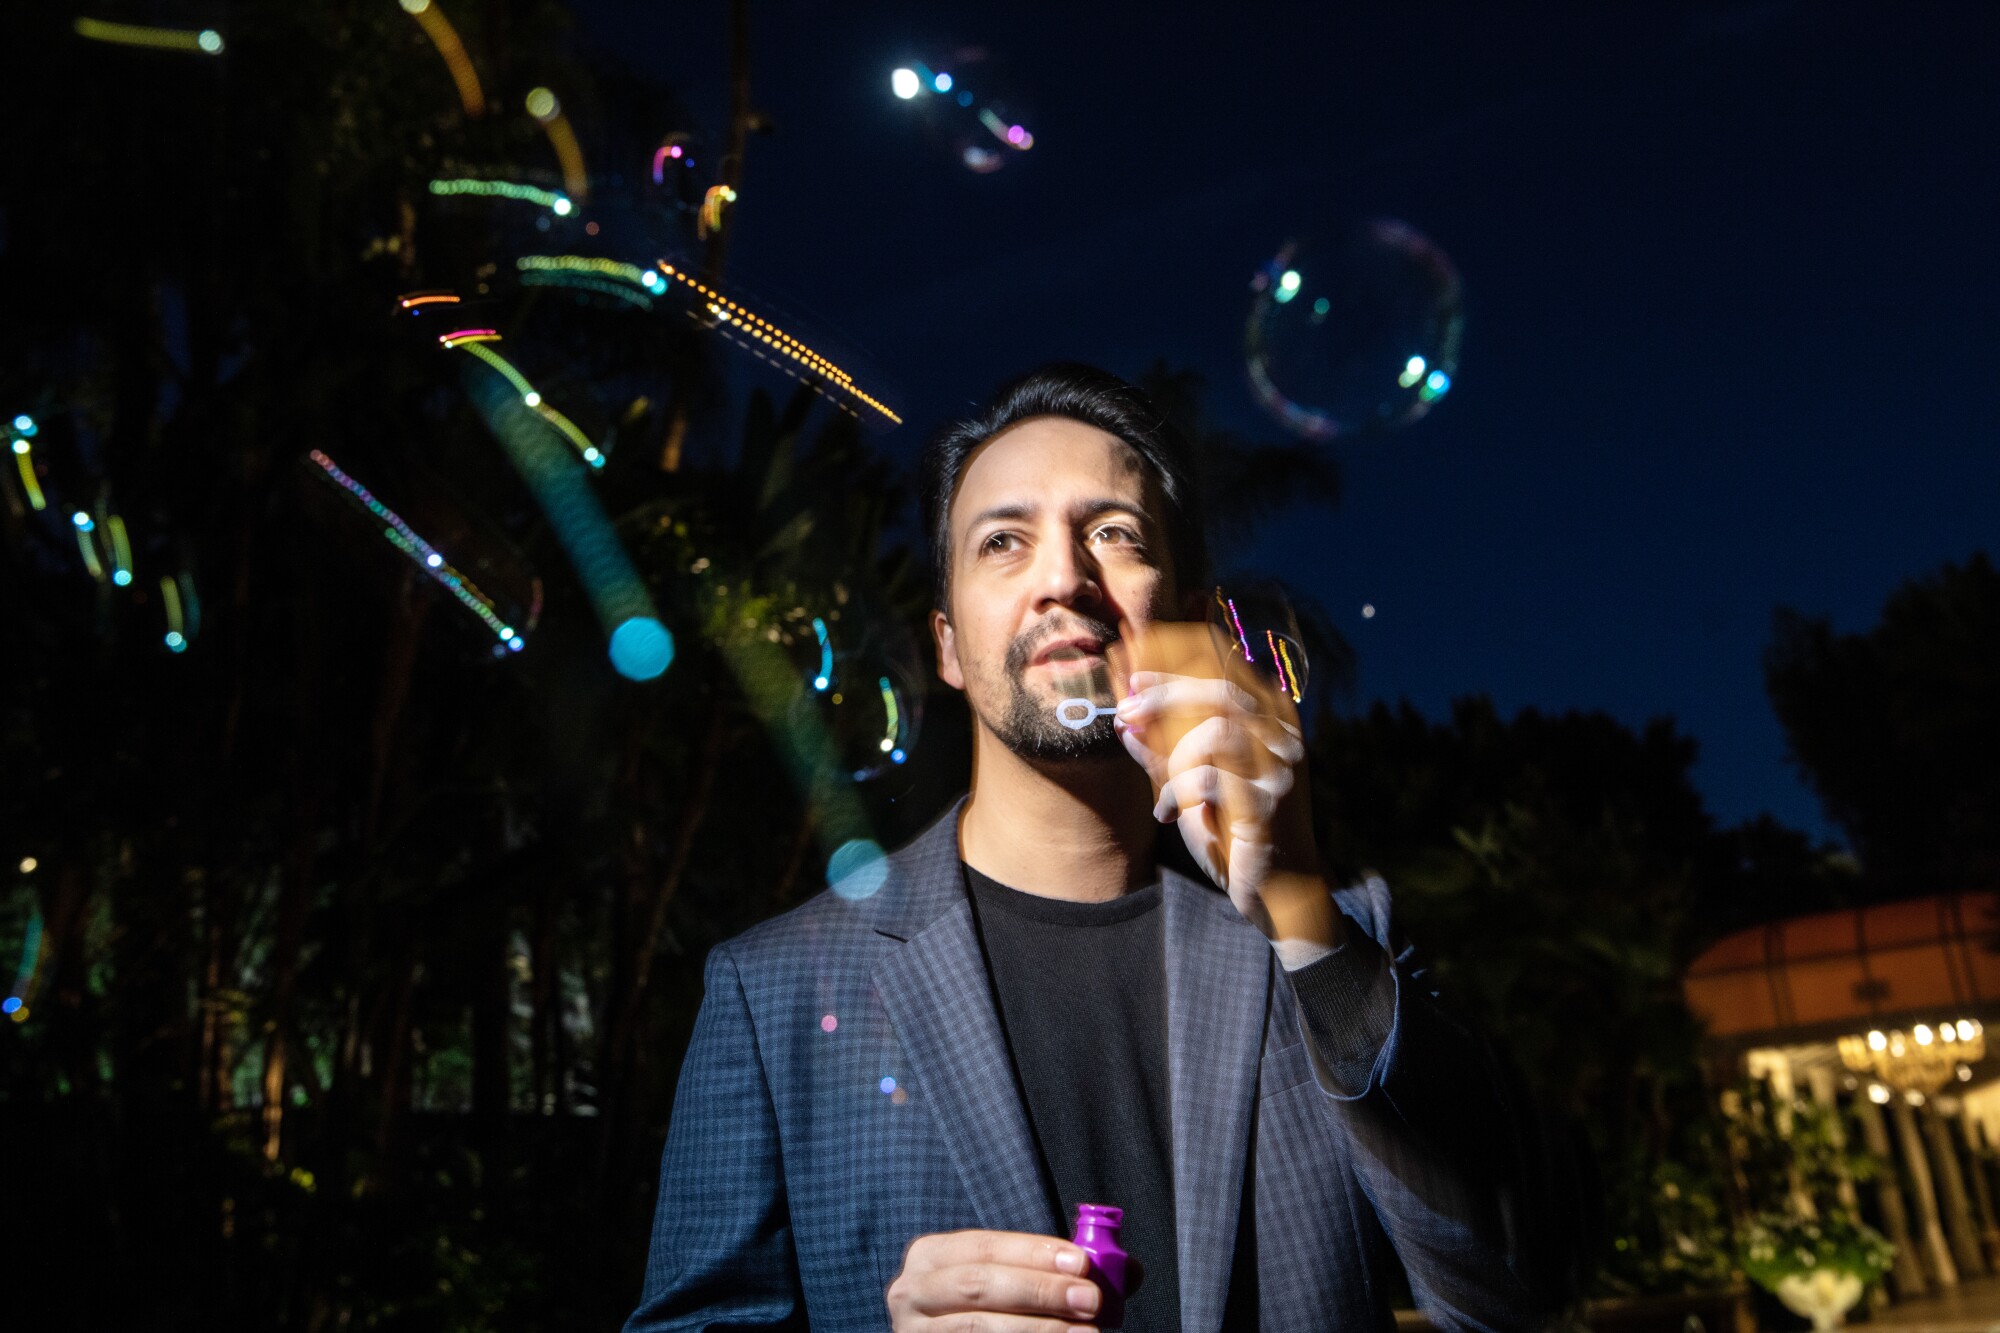 Director Lin-Manuel Miranda in a darkened room with colorful lights above him.